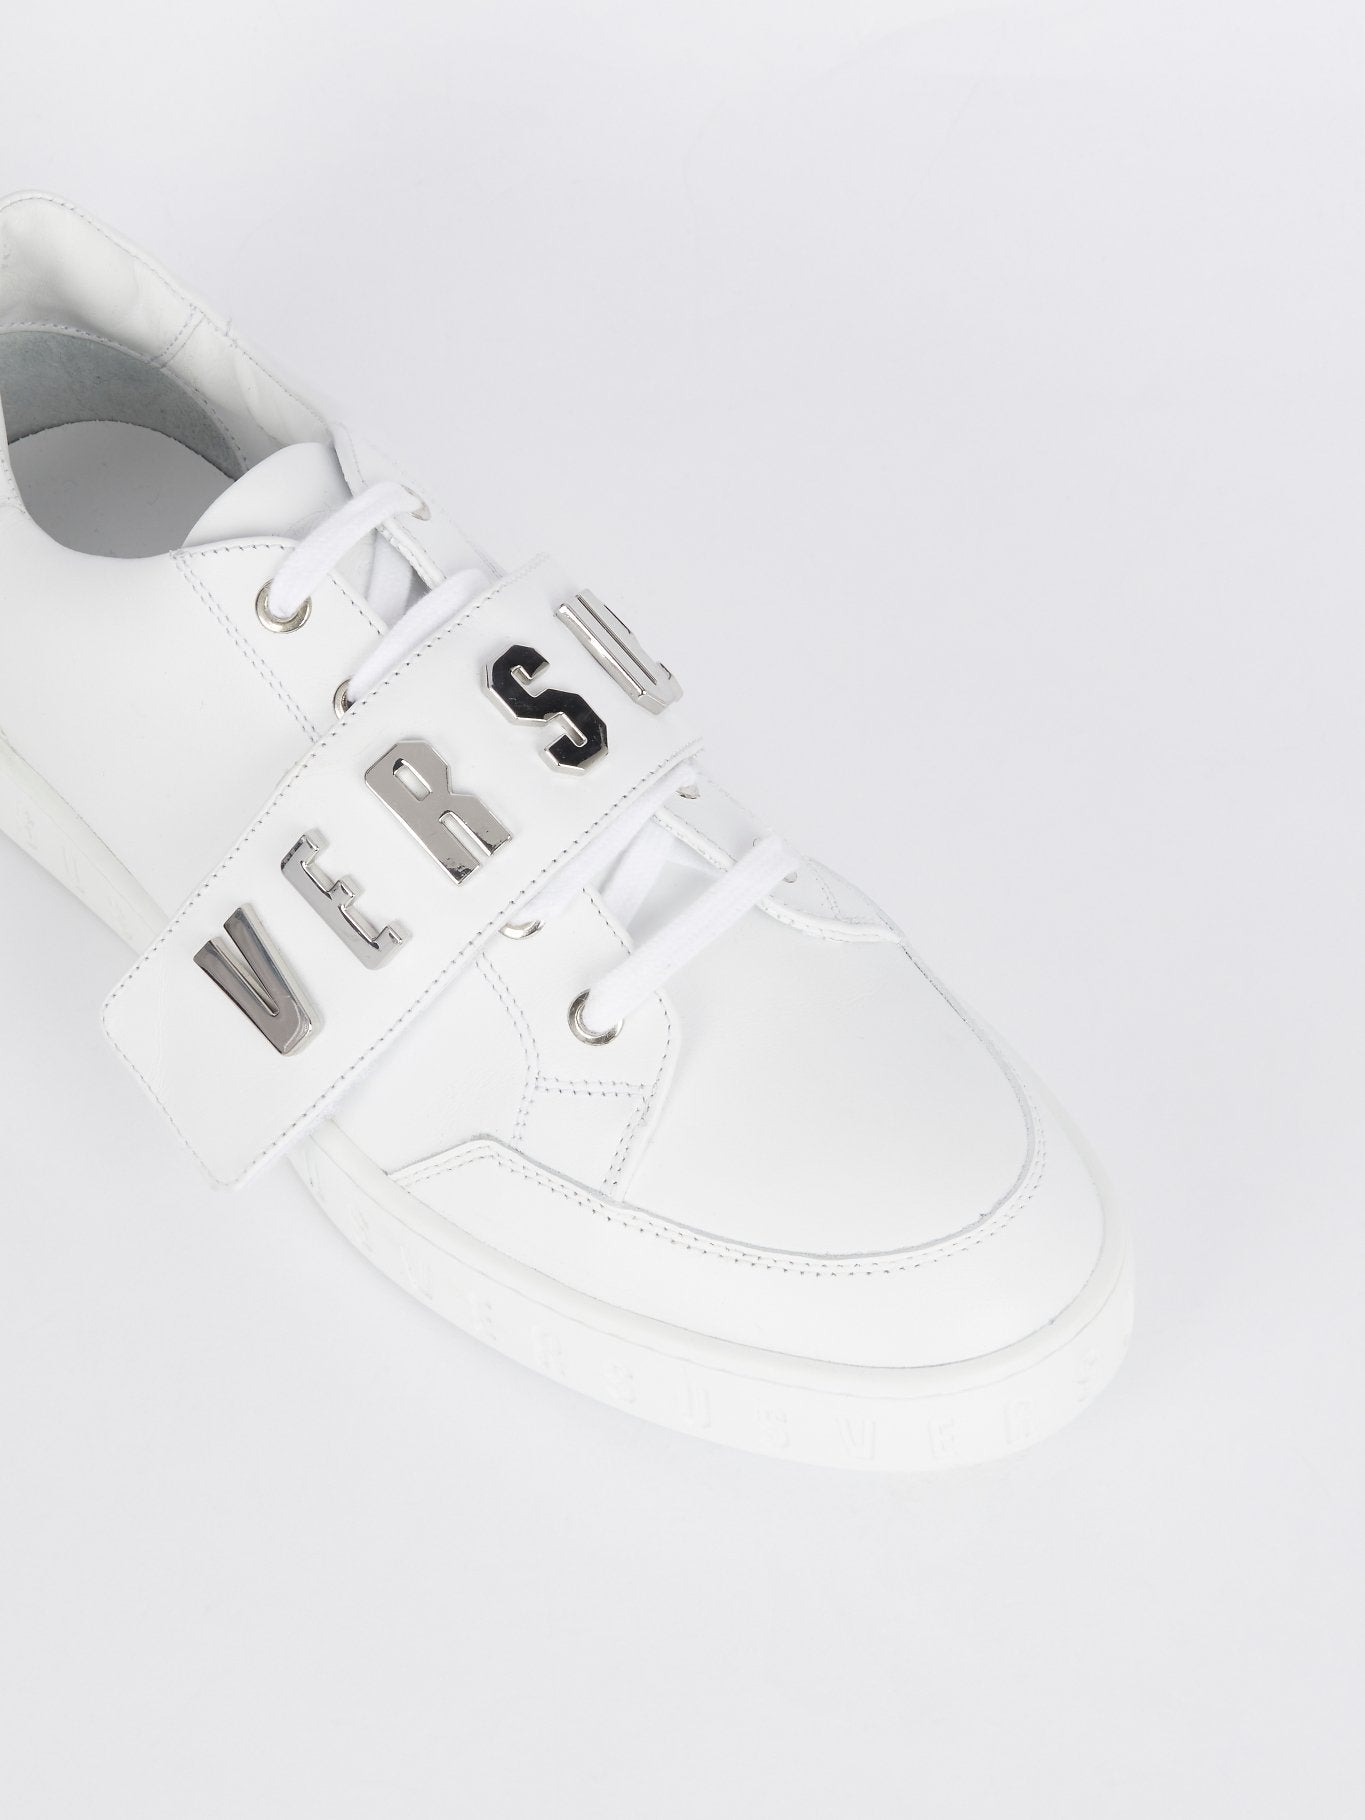 White Low Top Rubber Sole Sneakers